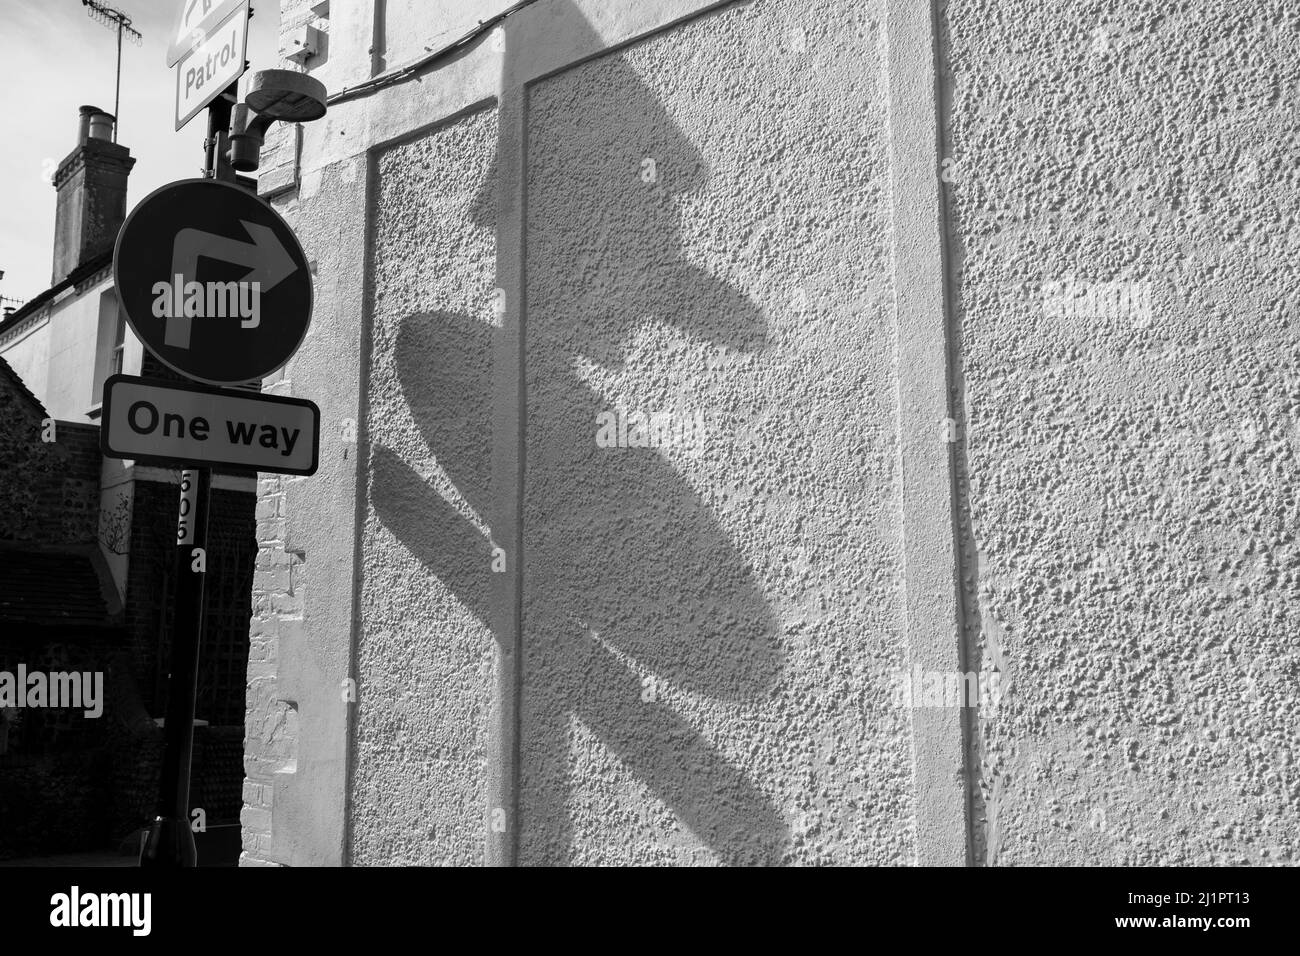 The shadow of a puppet's head from a road sign Stock Photo